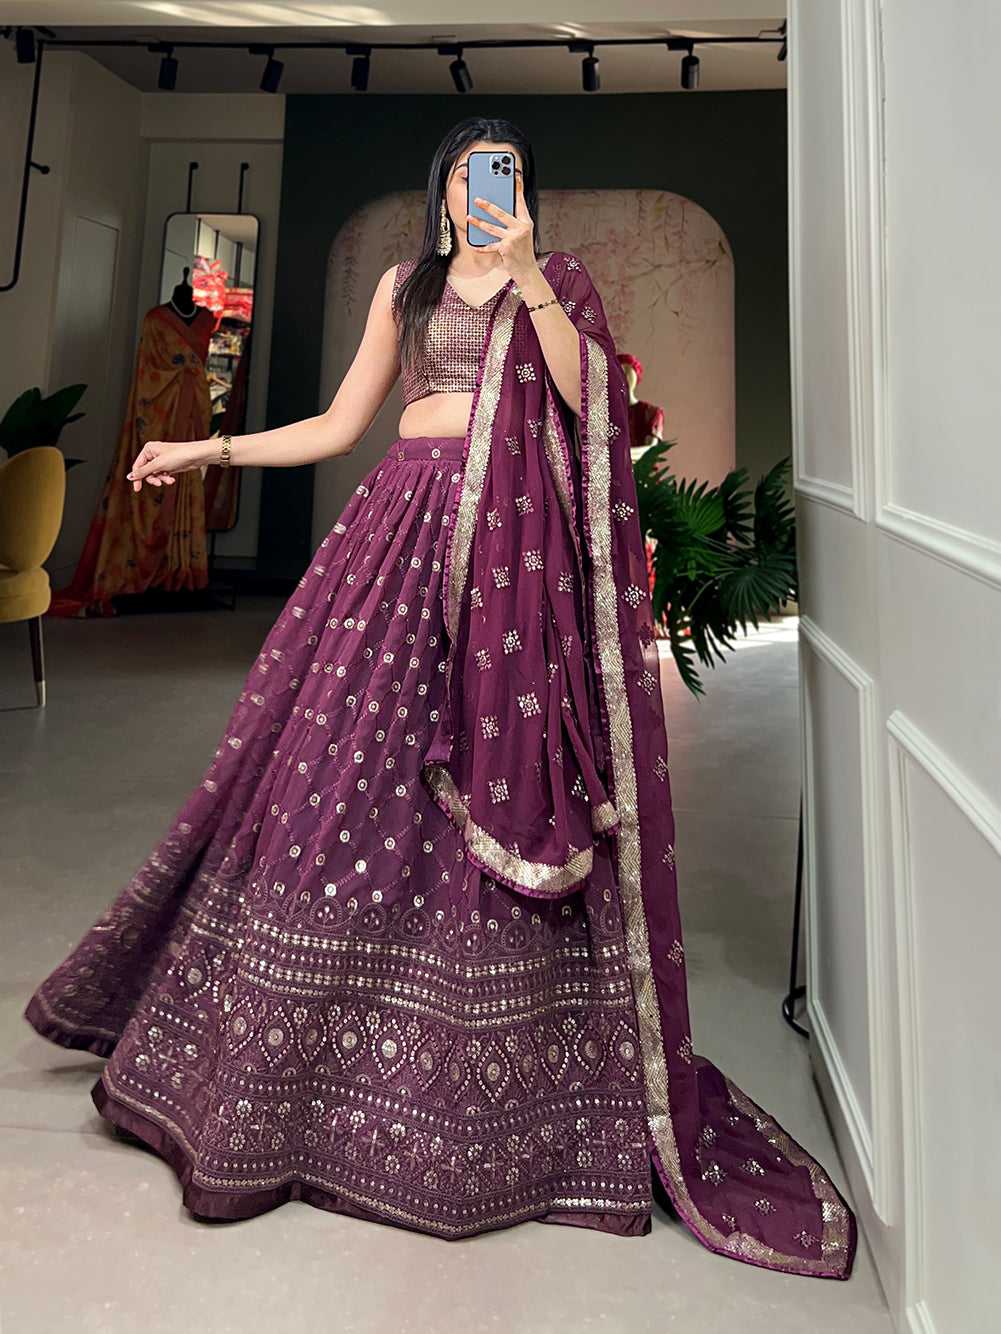 EXQUISITE LEHENGA CHOLI ADORNED WITH METICULOUS SEQUIN EMBROIDERY